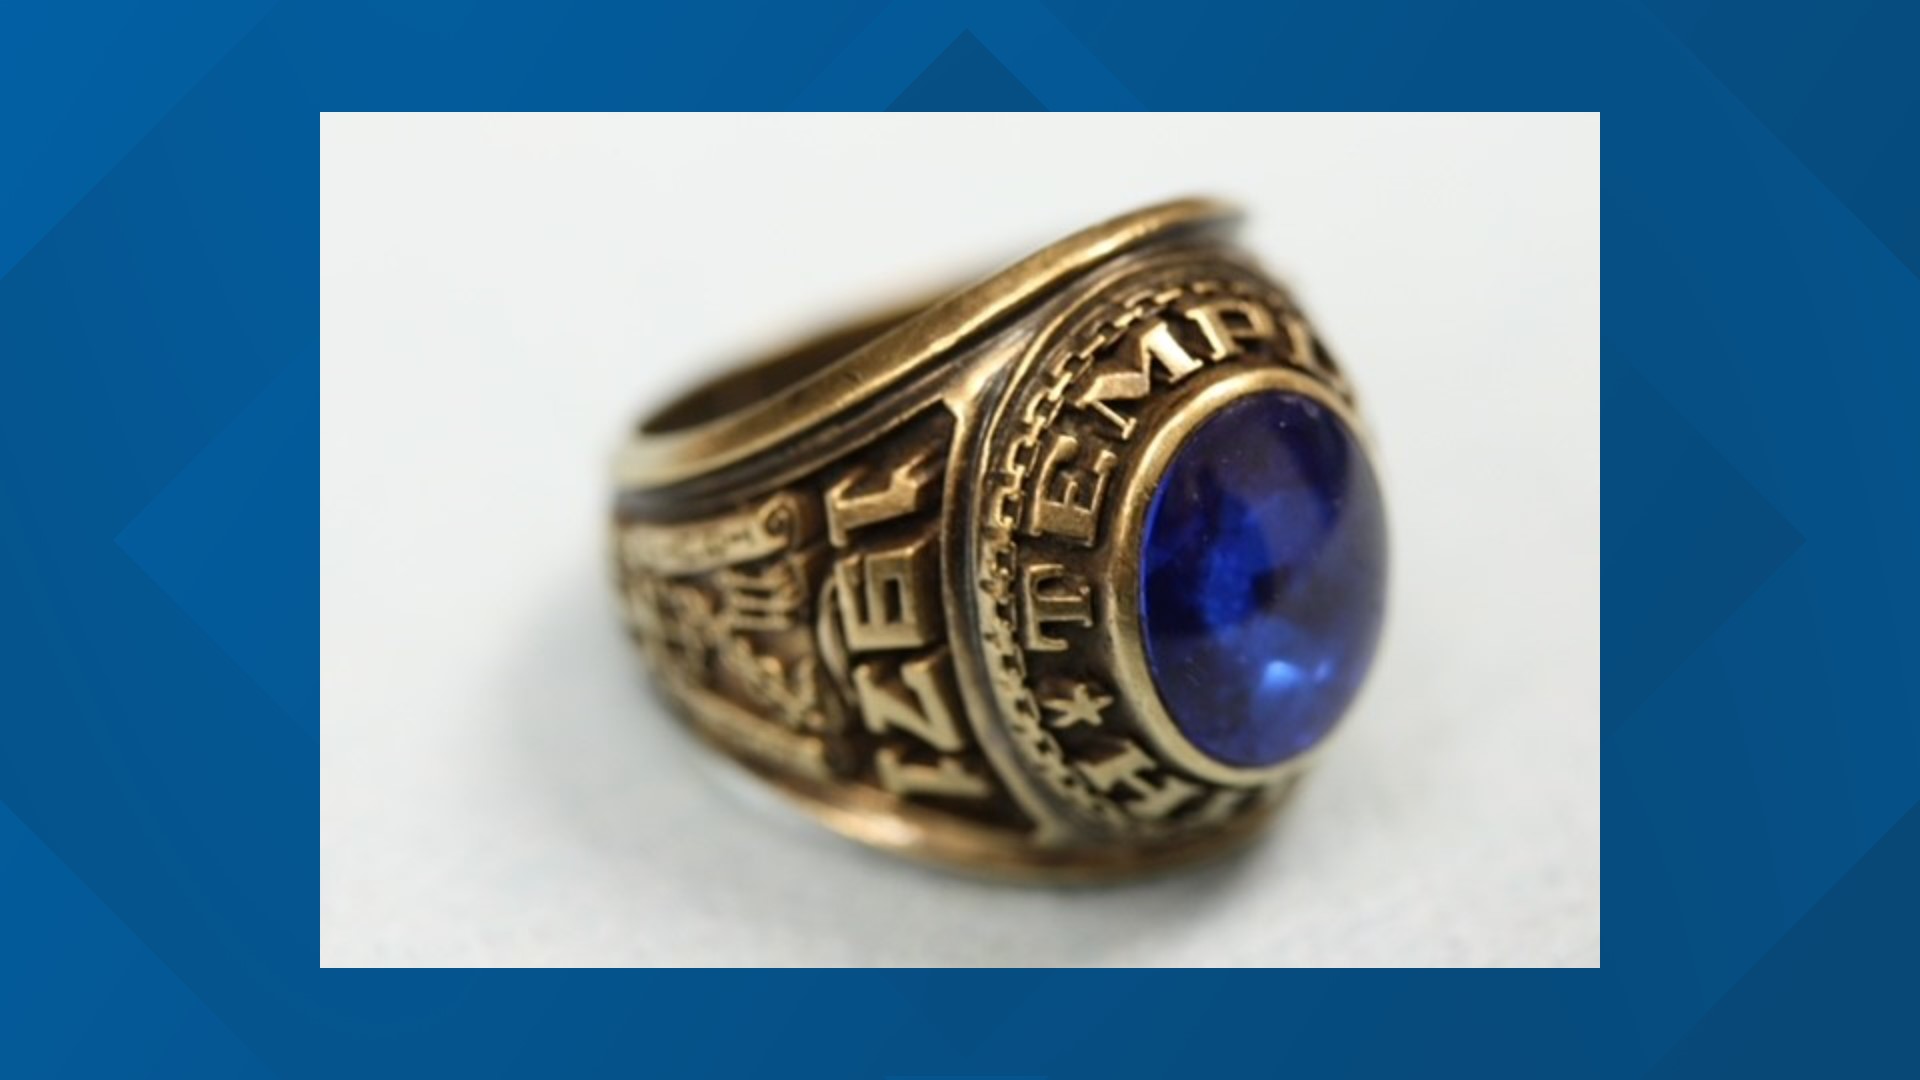 A lost Temple High School ring was found 50 years later and returned to its owner. Maria Aguilera reports.